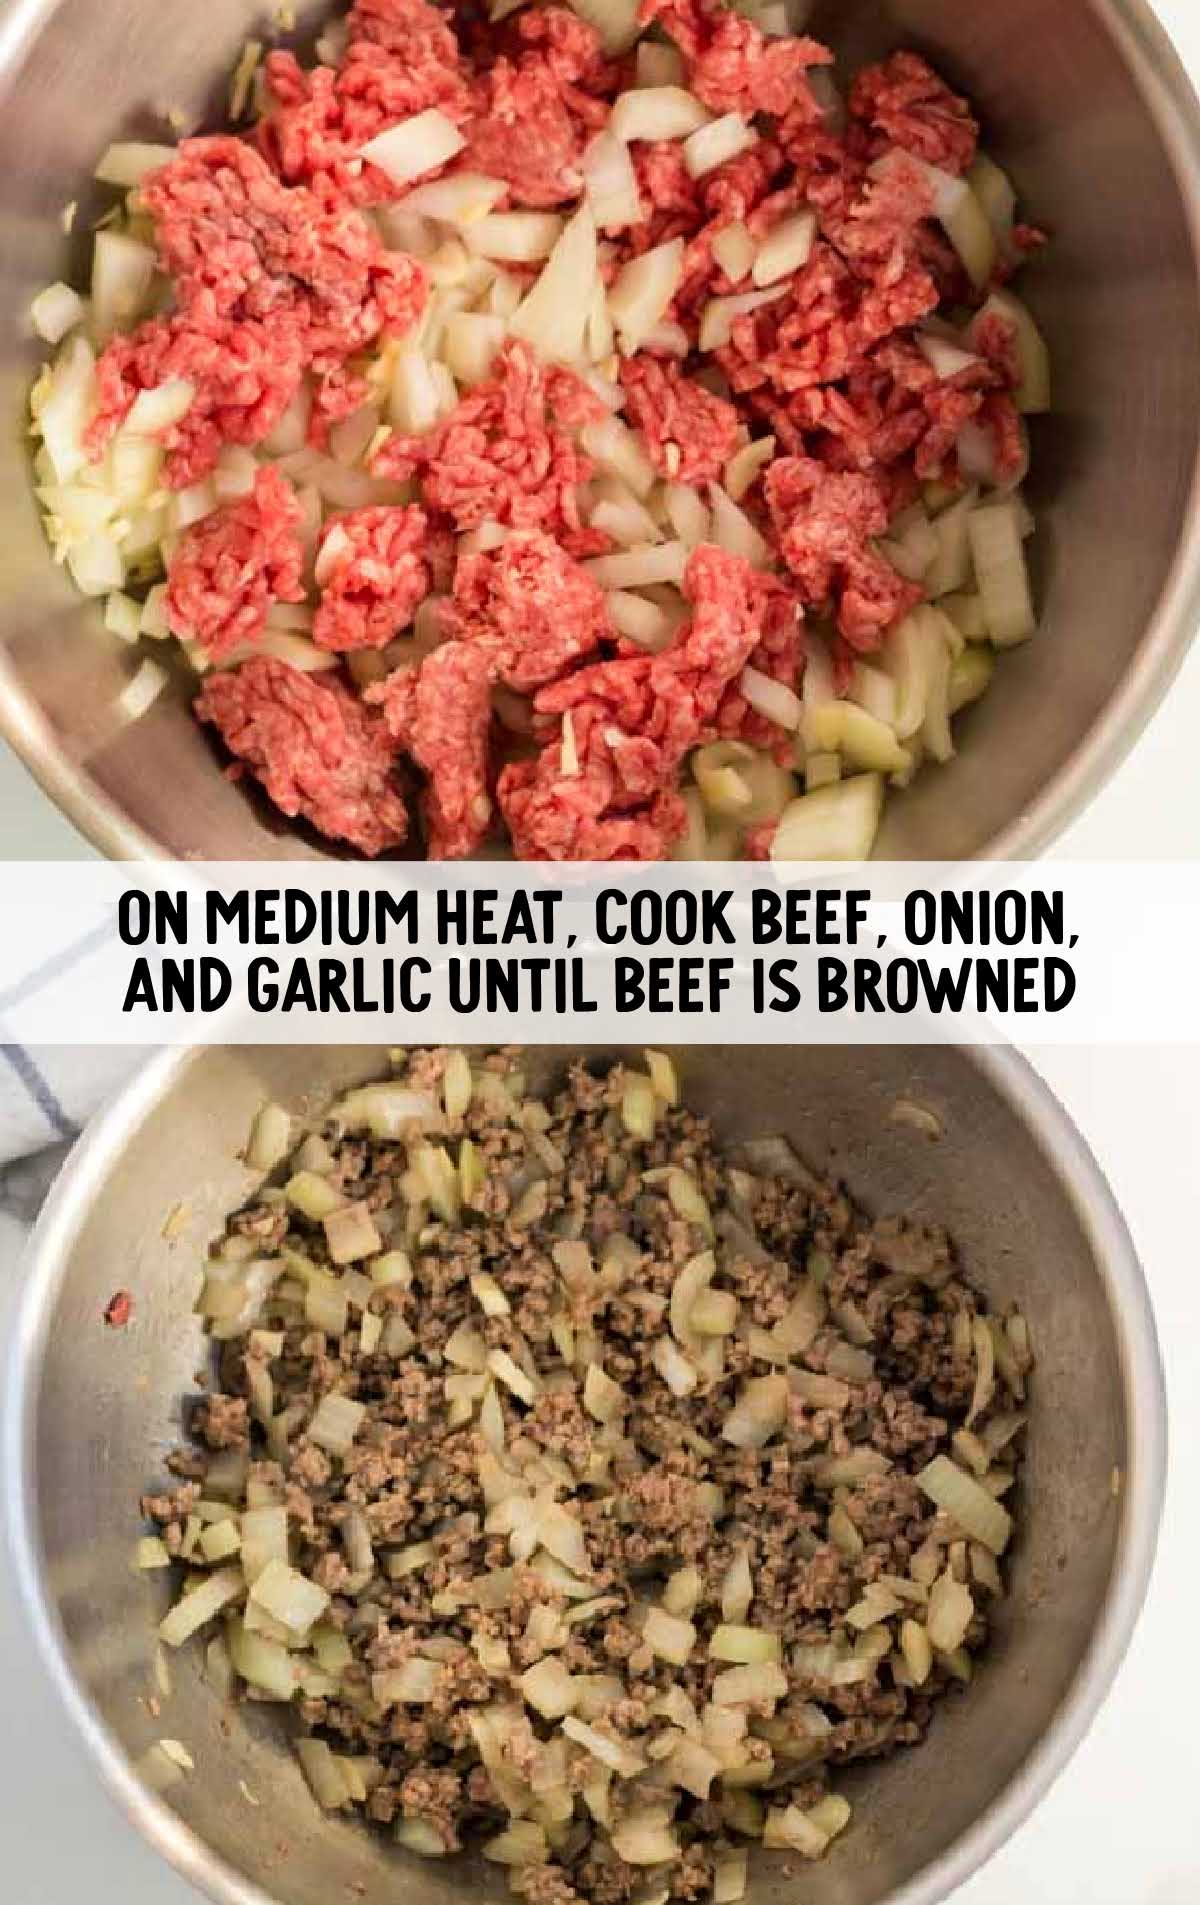 ground beef, onion, and garlic being cooked in a skillet